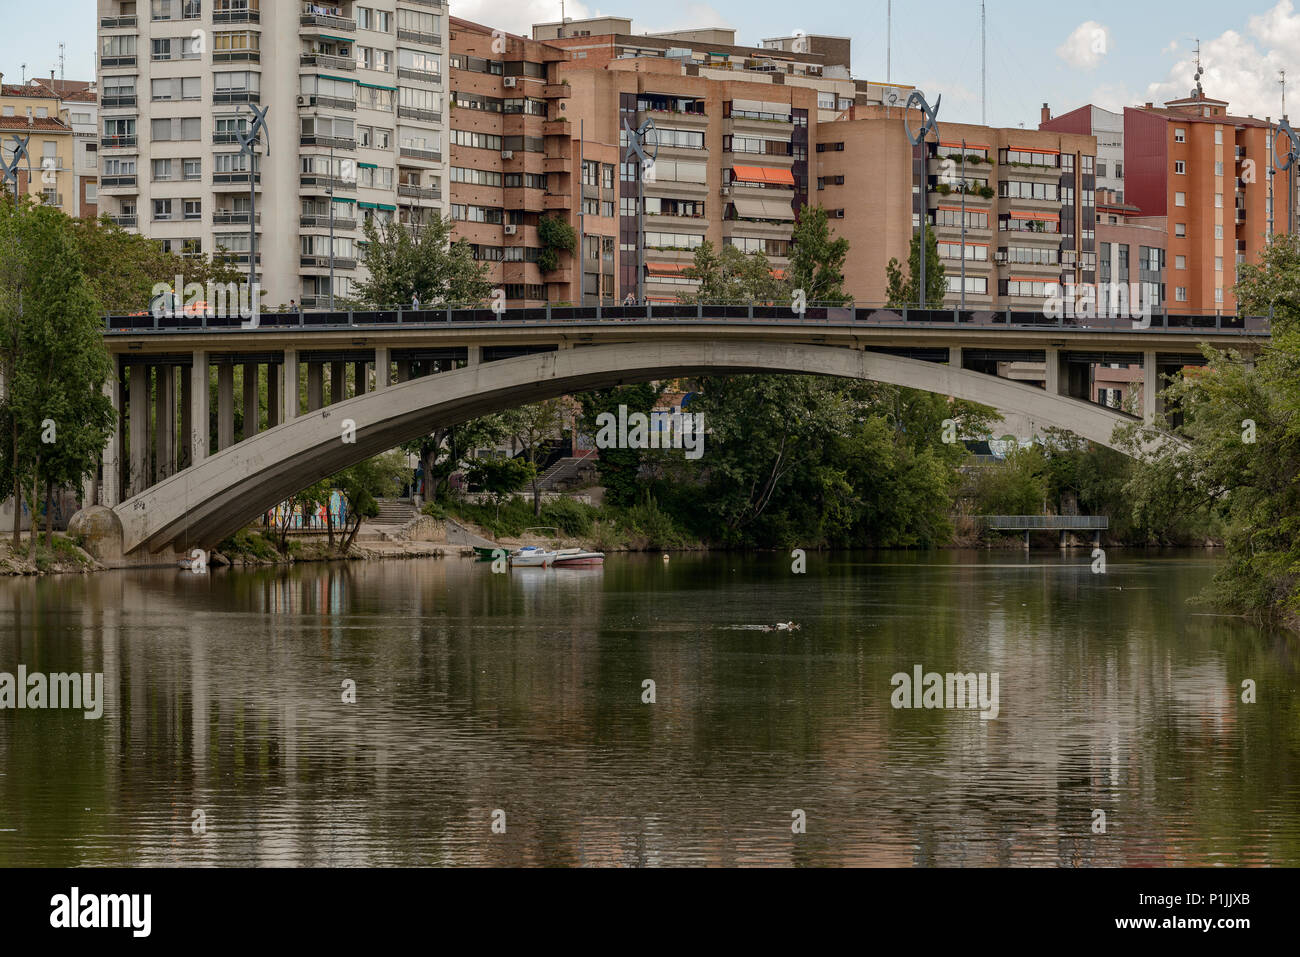 Puente del Cubo, or Isabel la Católica bridge in its official name, on the Pisuerga river in the center of the city of Valladolid, Spain, Europe Stock Photo